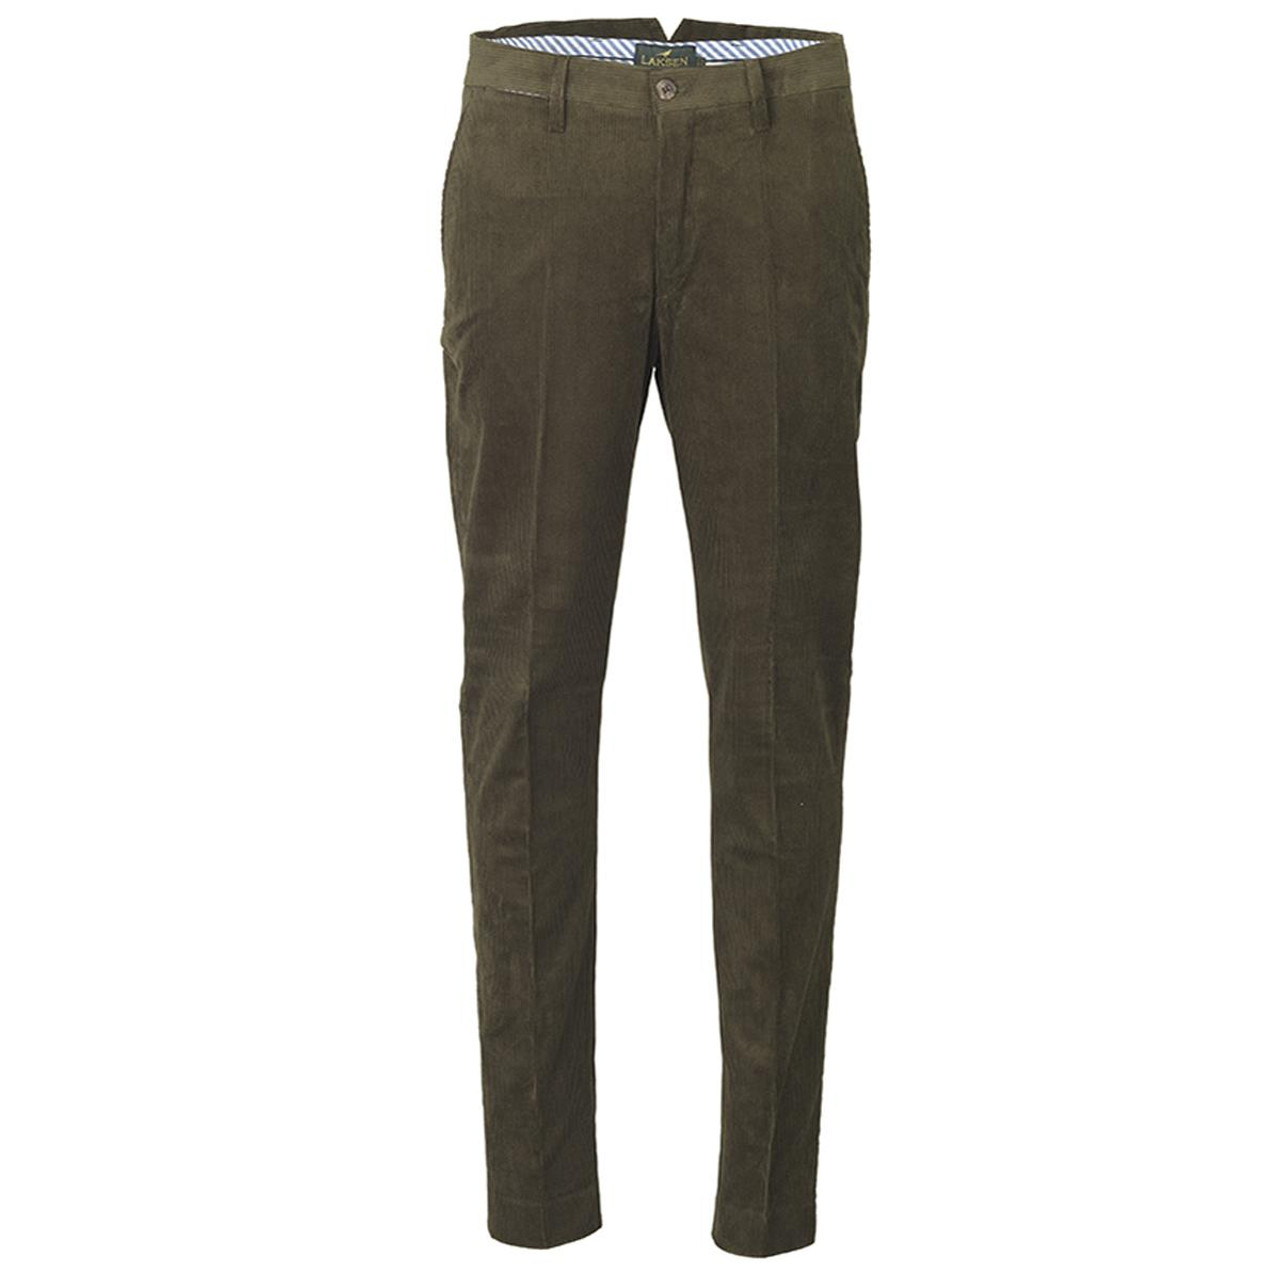 Best corduroy trousers in classic styles and colours | ShootingUK